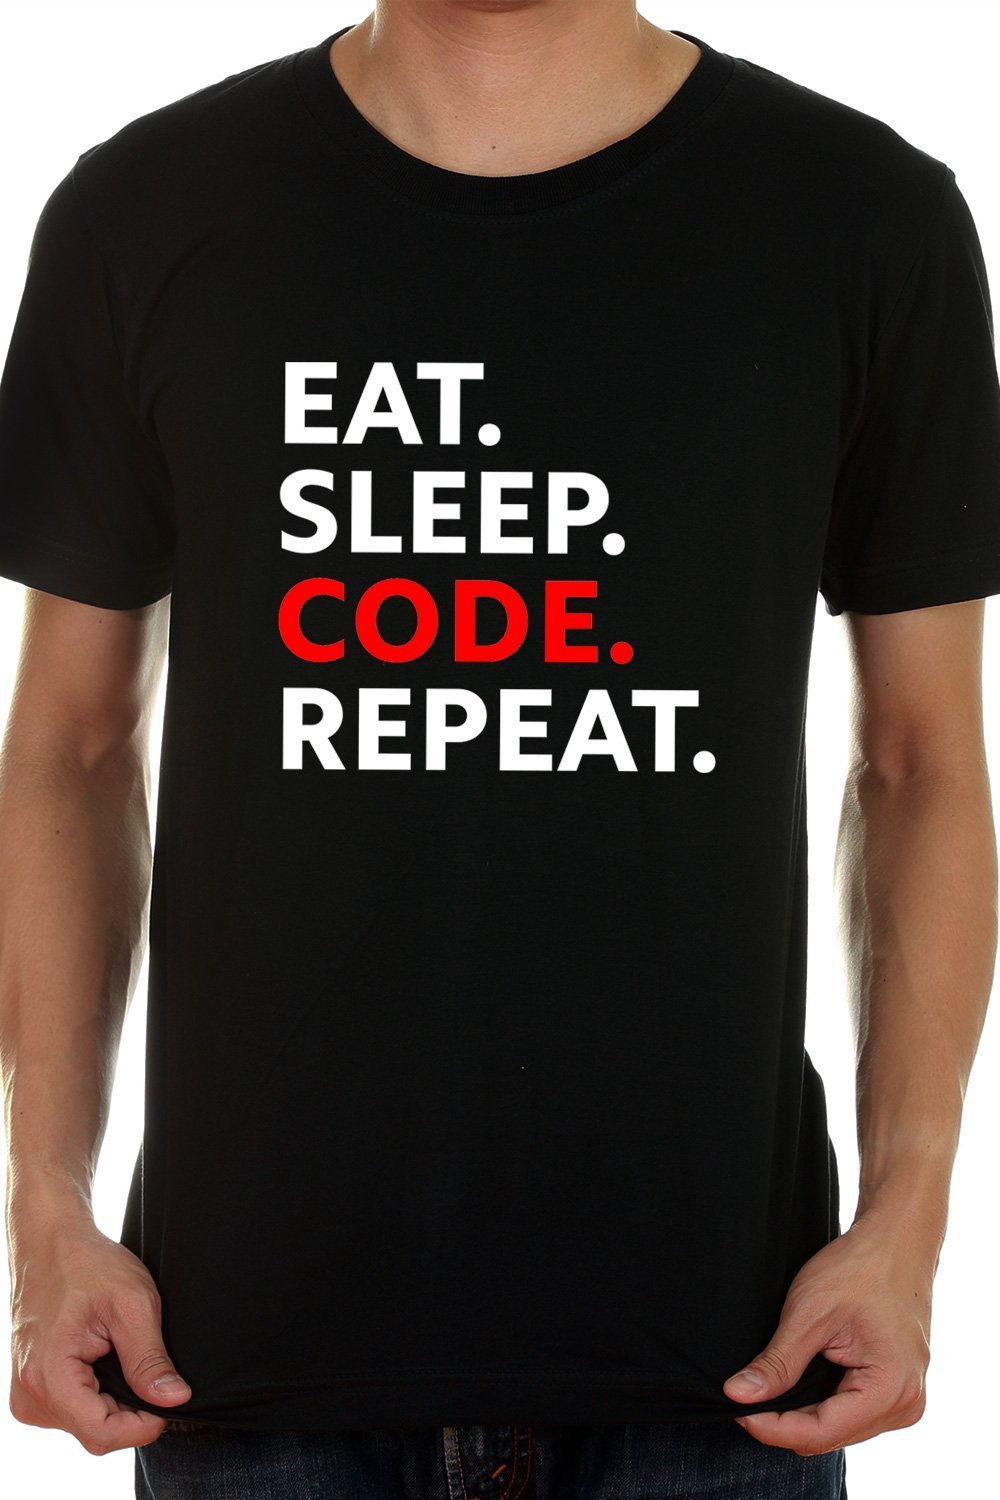 Eat Sleep Code Repeat - Casual Black Round Neck Cotton TShirt For Coders